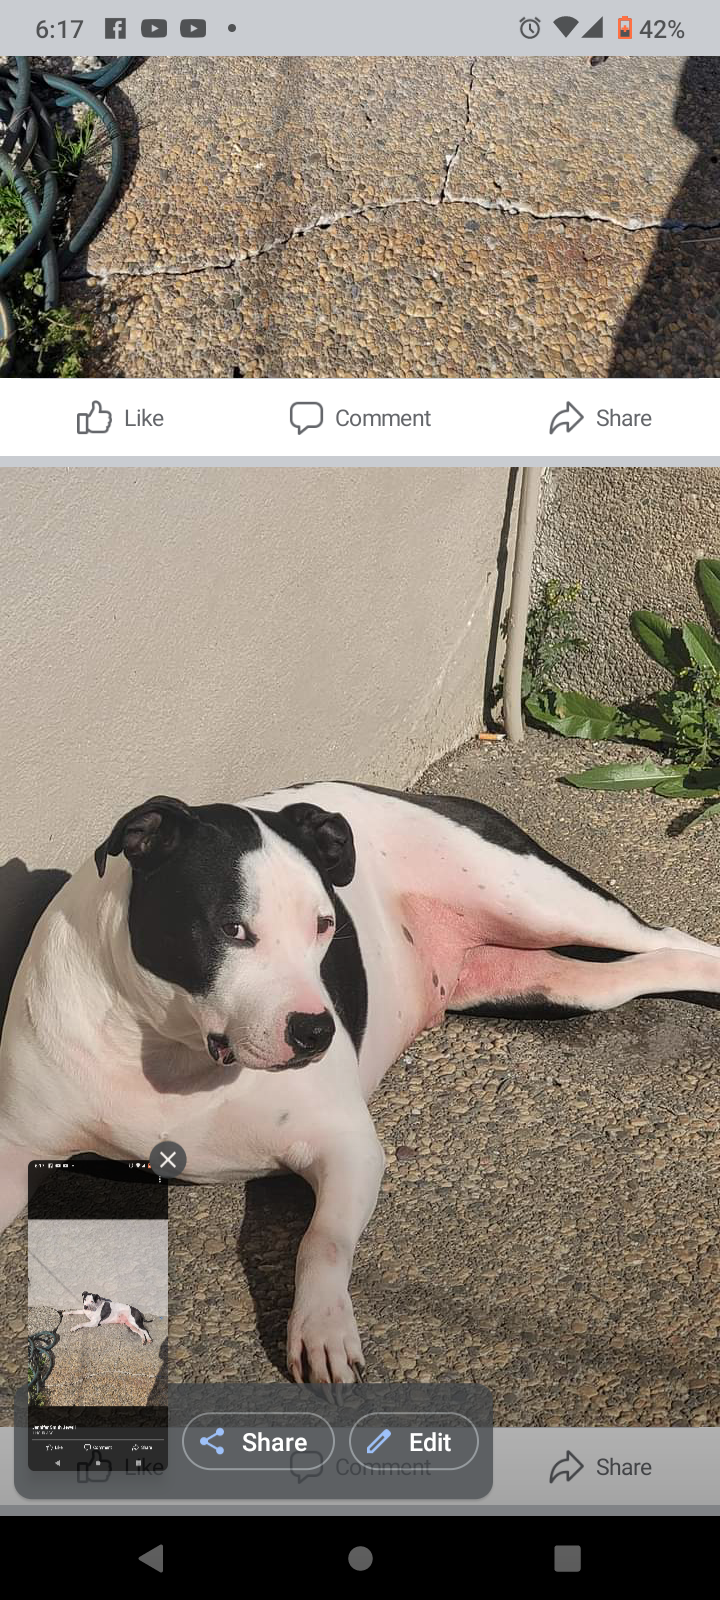 Image of Bubba, Lost Dog